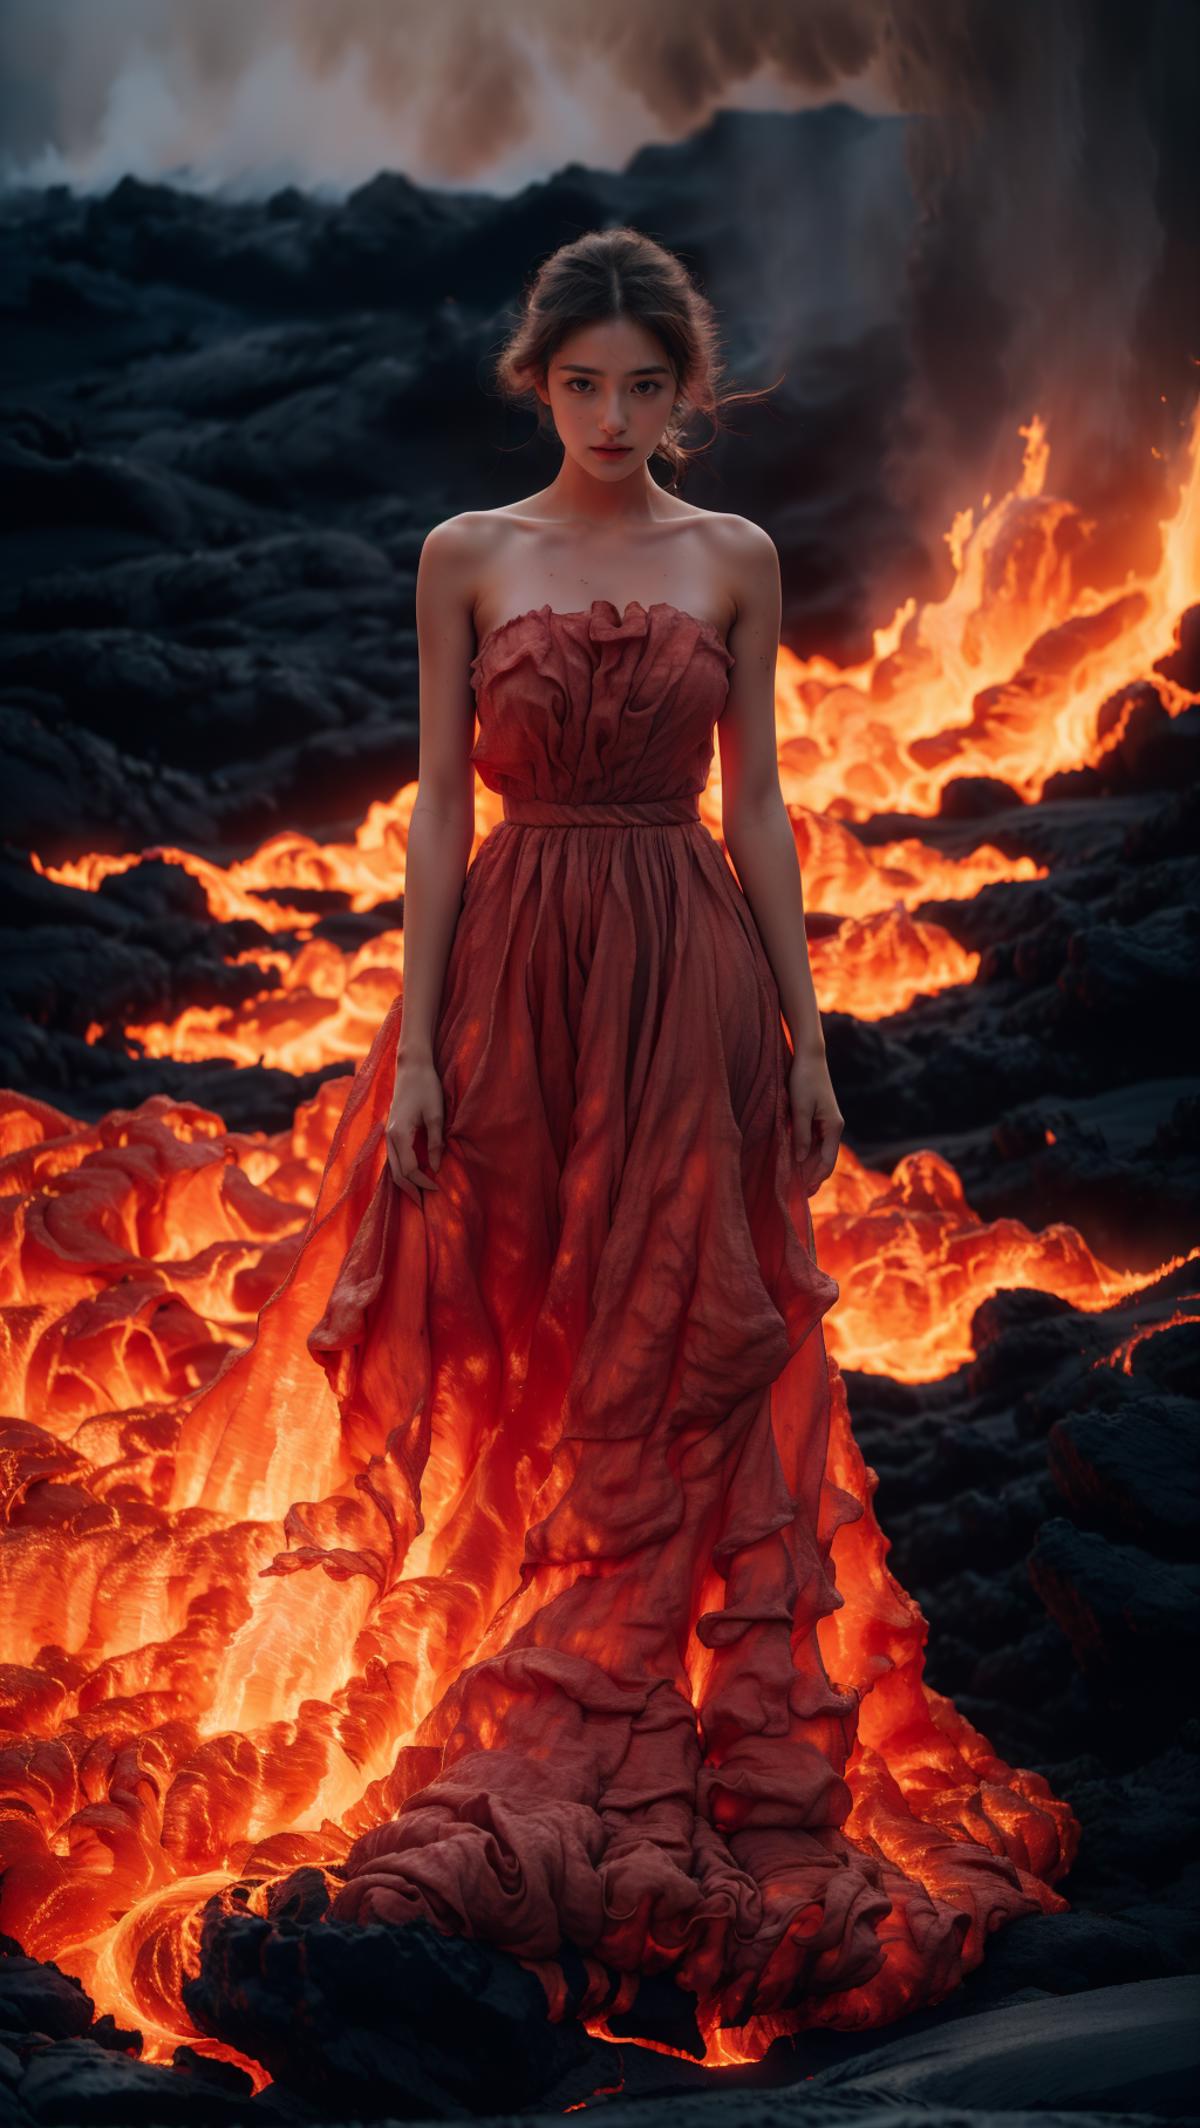 A woman standing in front of a volcano, wearing a red dress.